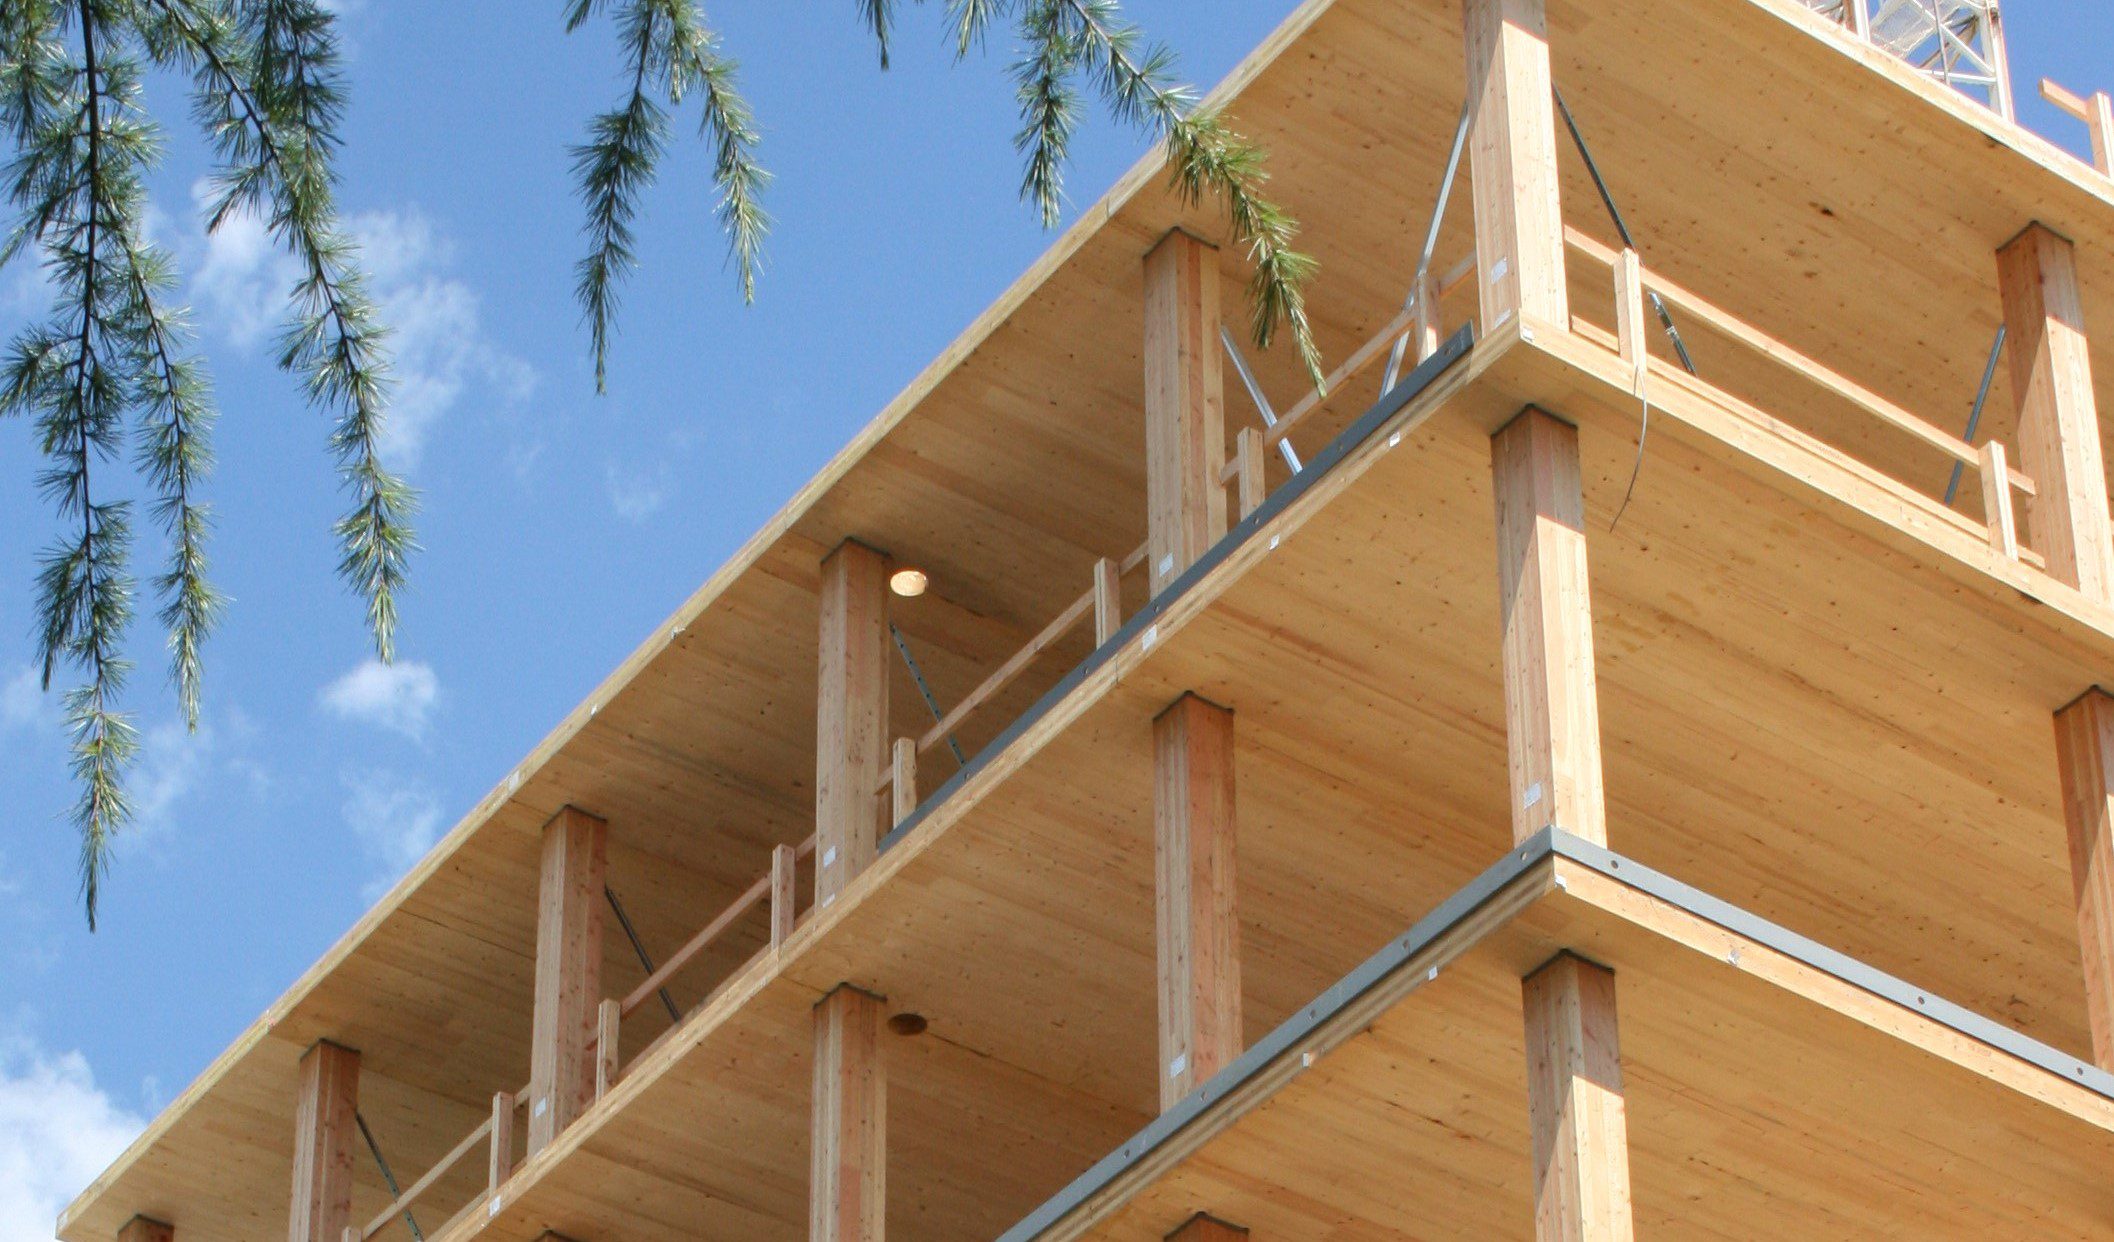 photo of mass timber building under construction